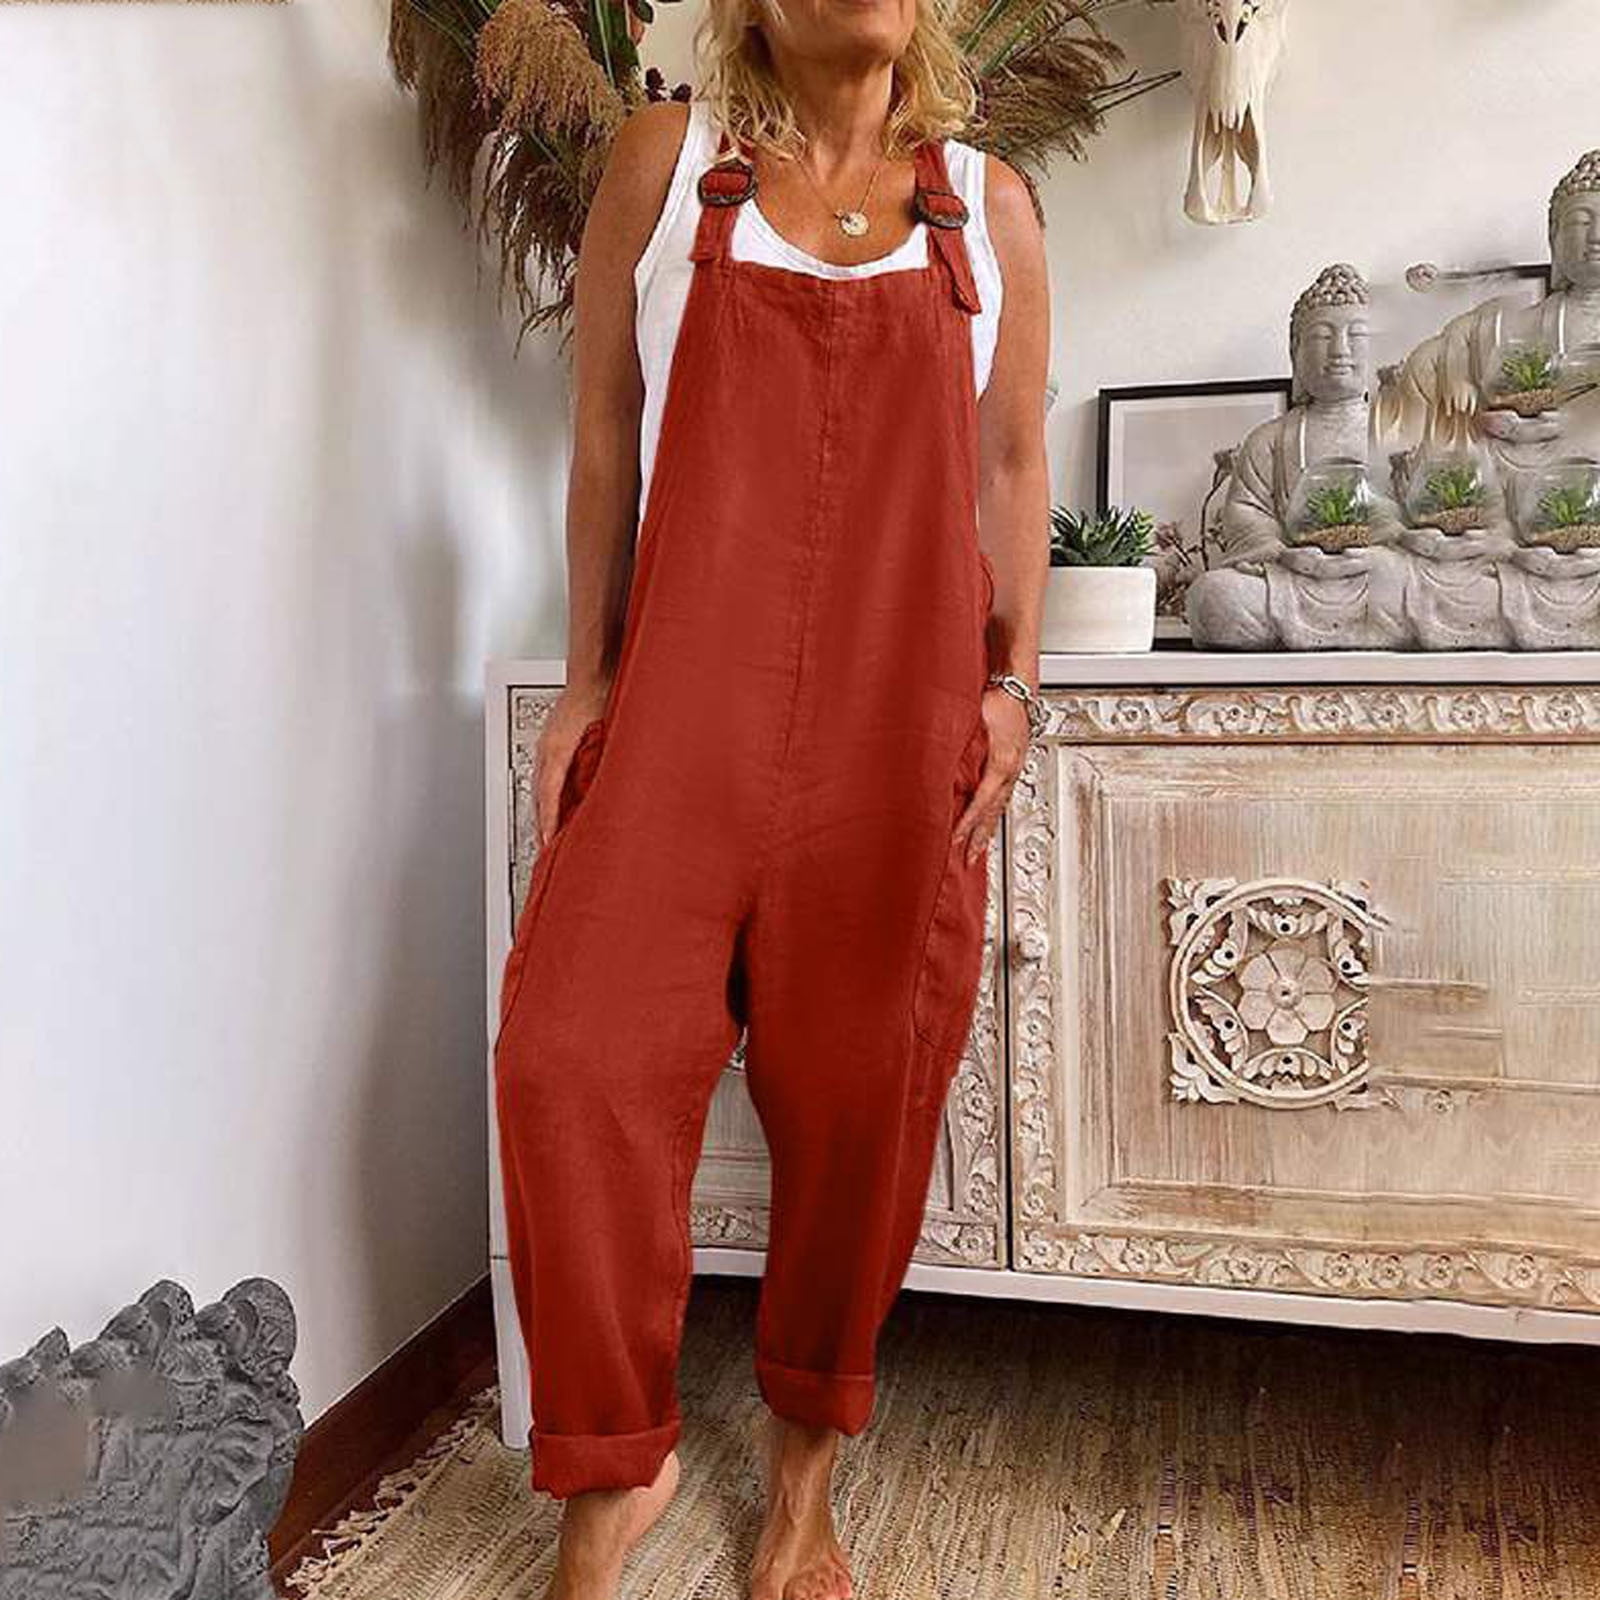 Londen Discrimineren breedte MELDVDIB Jumpsuits for Women Fashion Bib Pants Overalls Baggy Rompers  Jumpsuits with Pockets Casual Loose Bib Overall on Summer Clearance, Gifts  for Women - Walmart.com